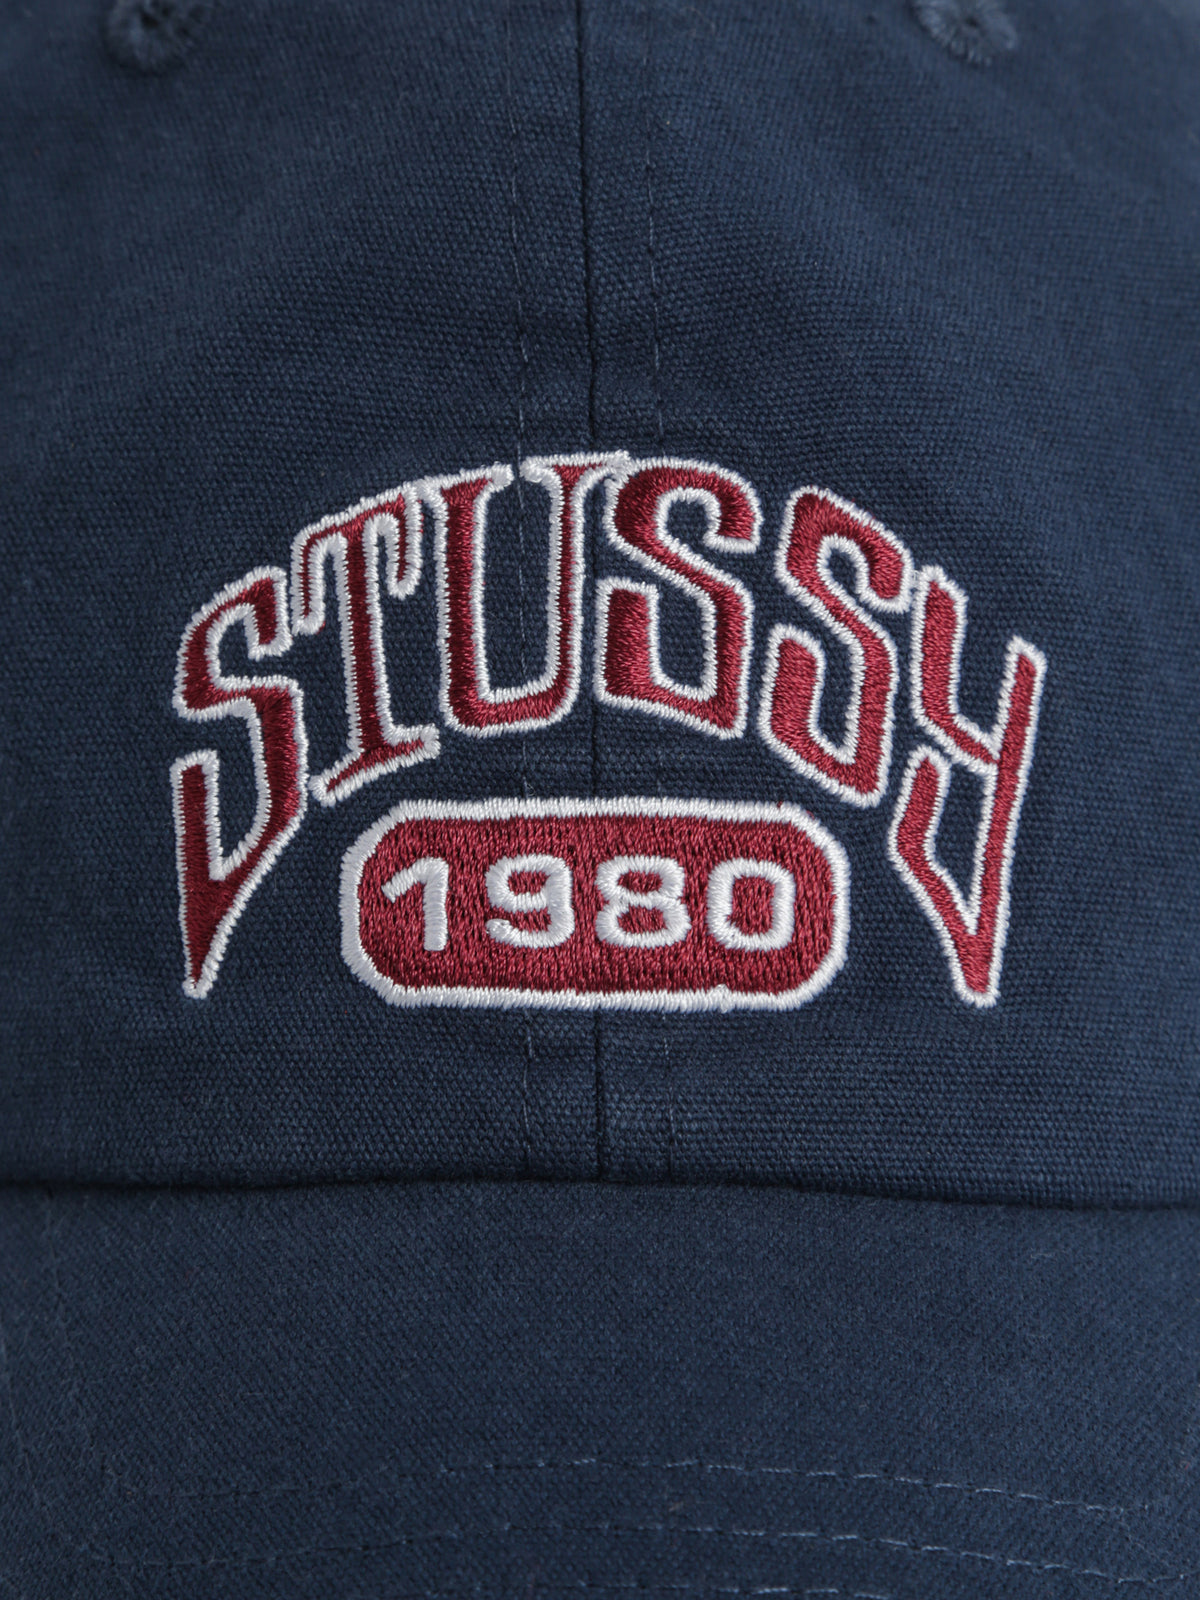 1980 Low-Pro Cap in Navy and Burgundy